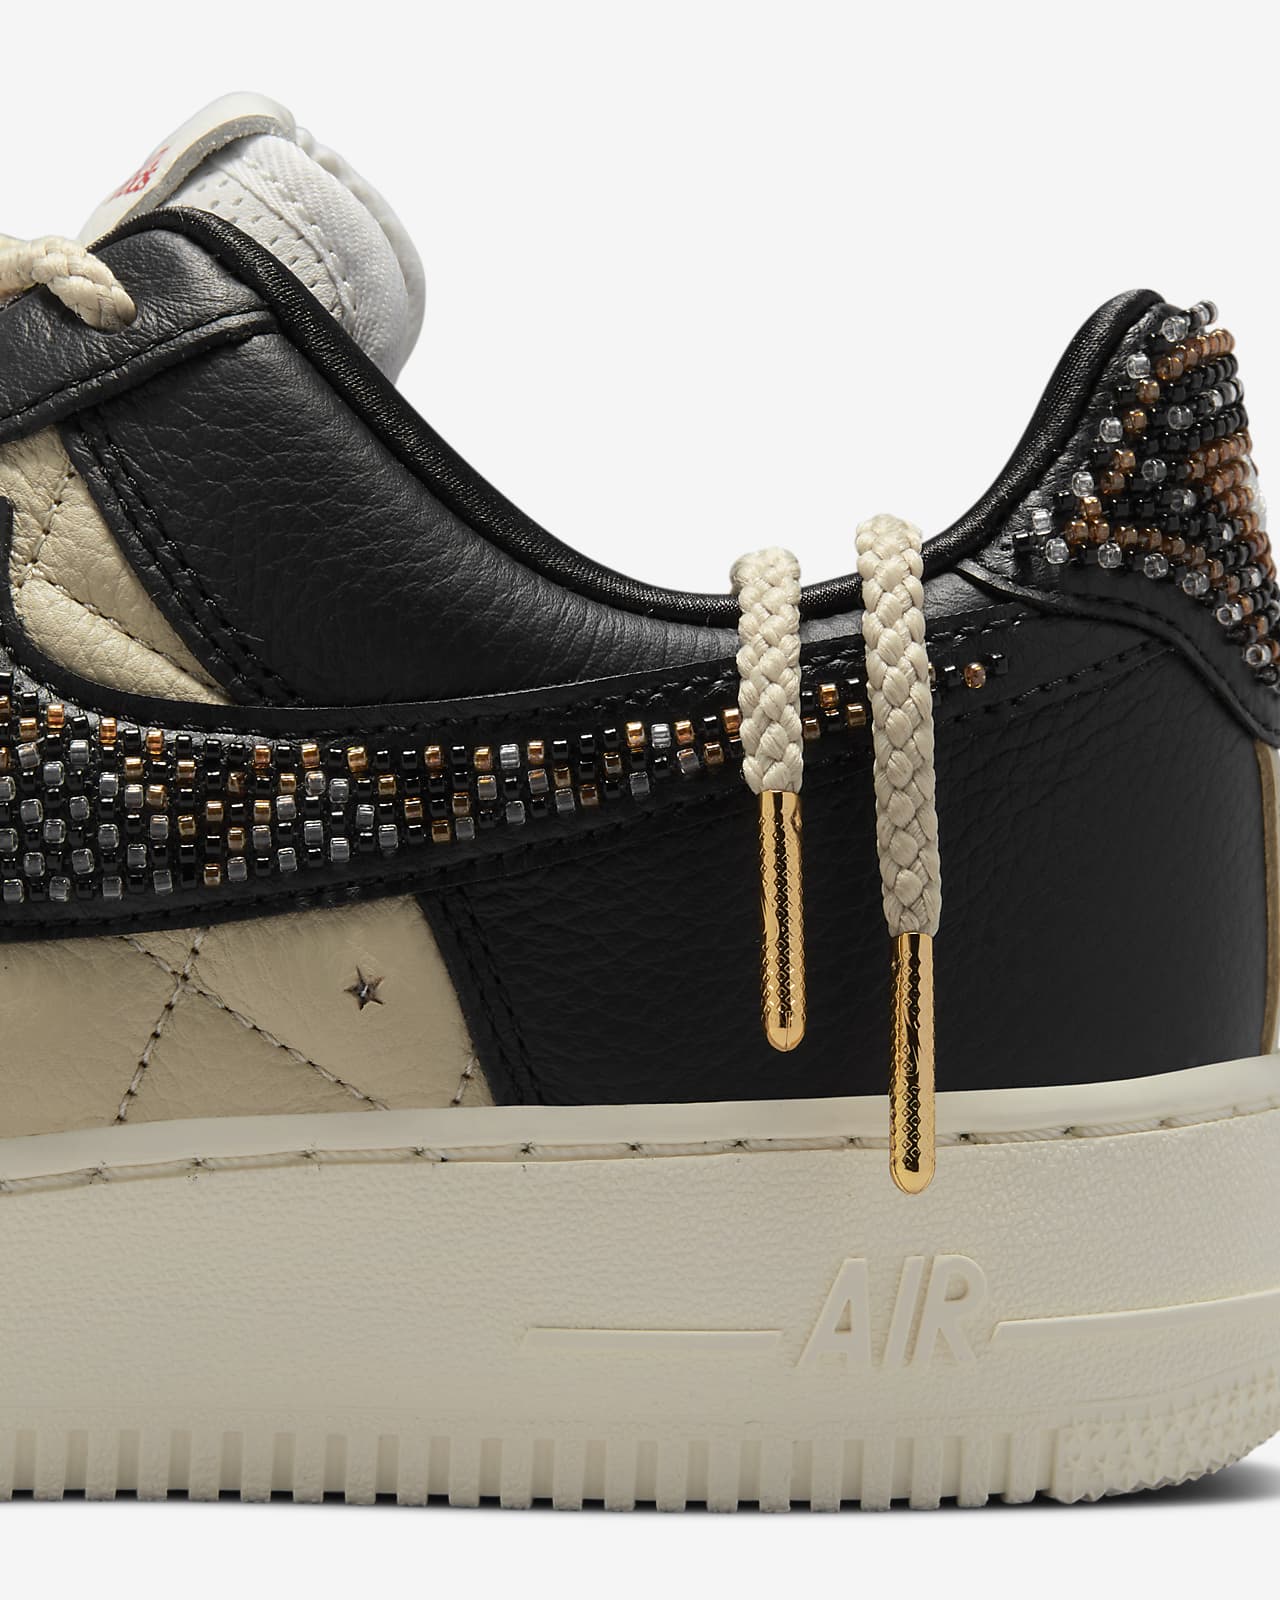 Nike Air Force 1 Low Goes Luxurious in Black and White